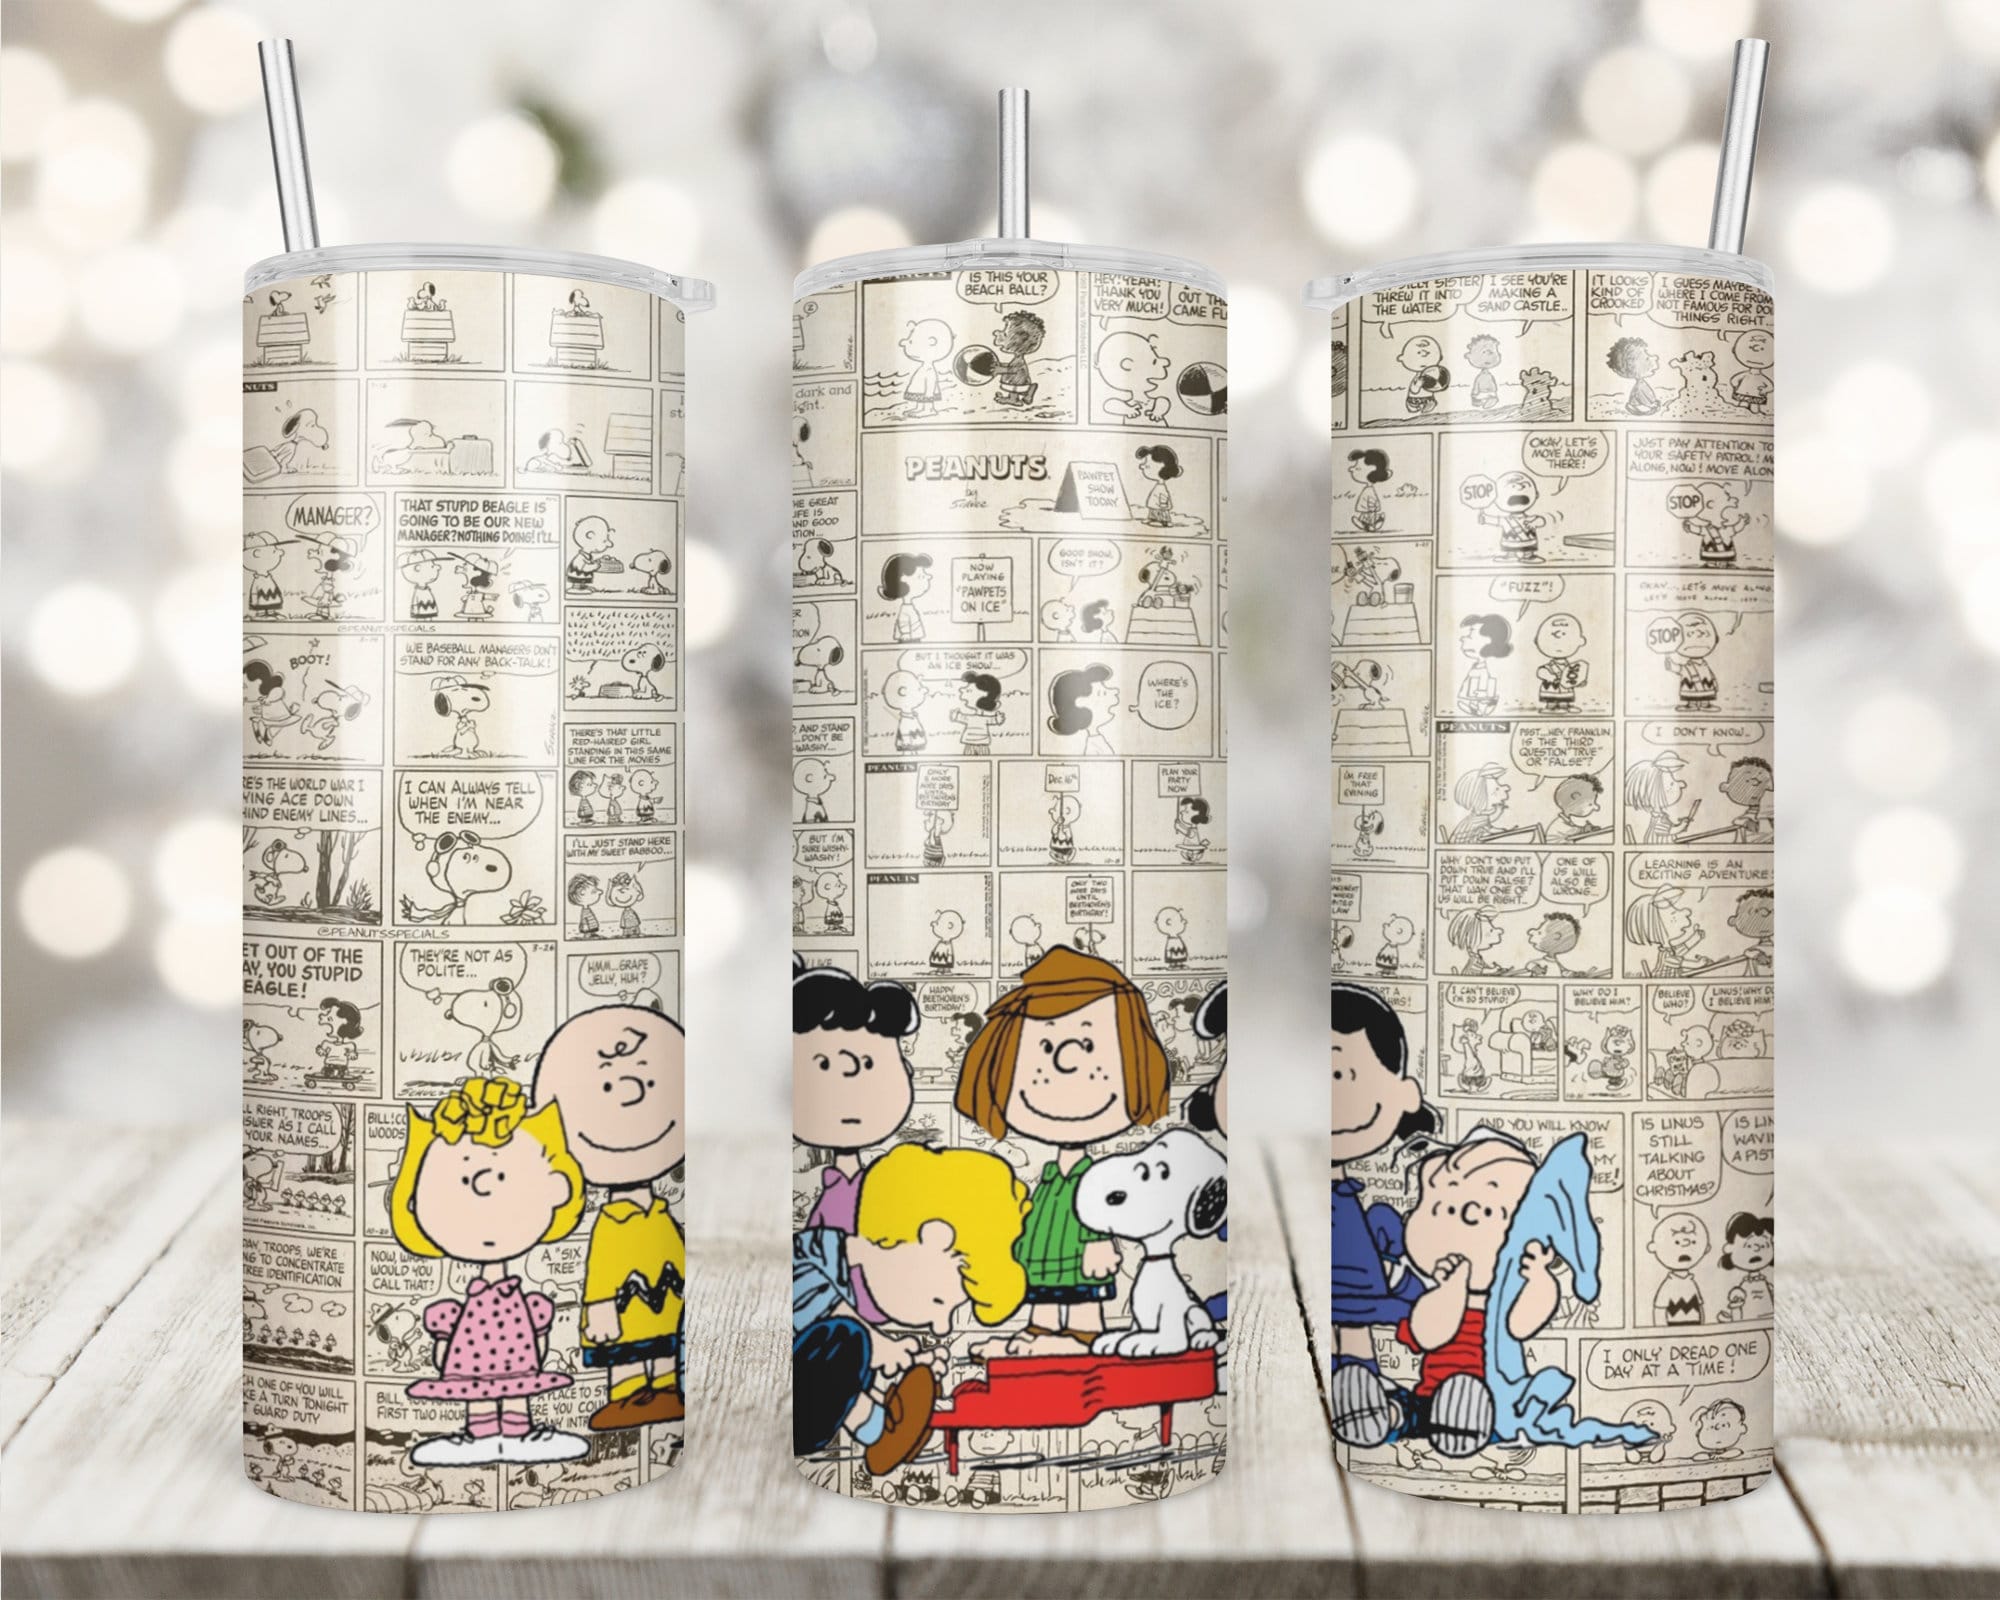 NWT Peanuts Snoopy and Woodstock light up Tumbler with dome, cover and  swirly straw.